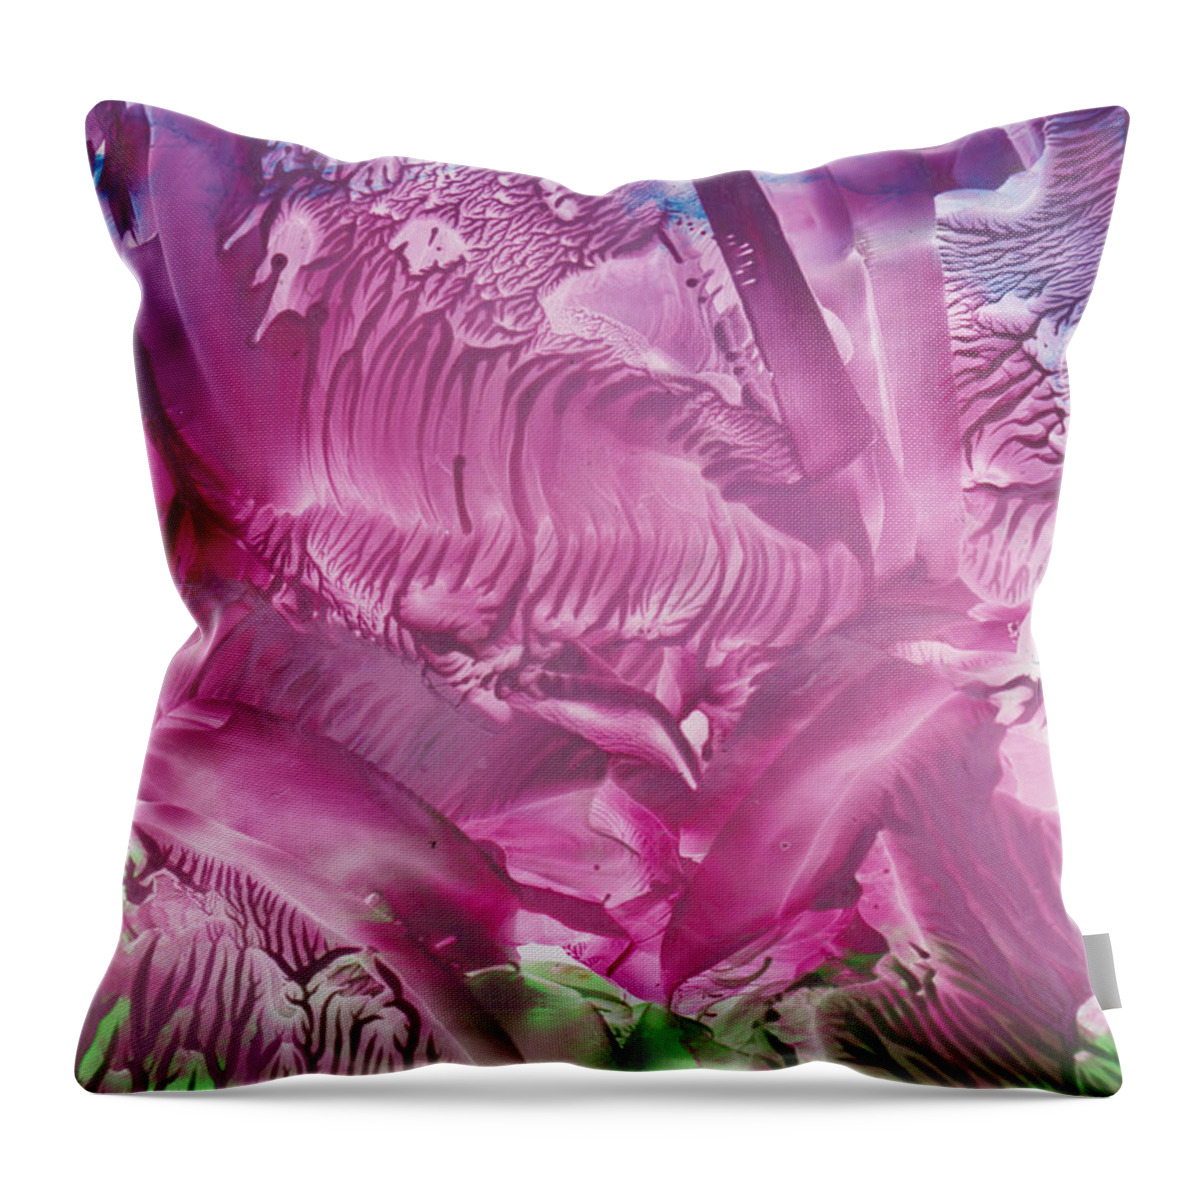 Encaustic Wax Art Throw Pillow featuring the painting Iris by Shelley Jones